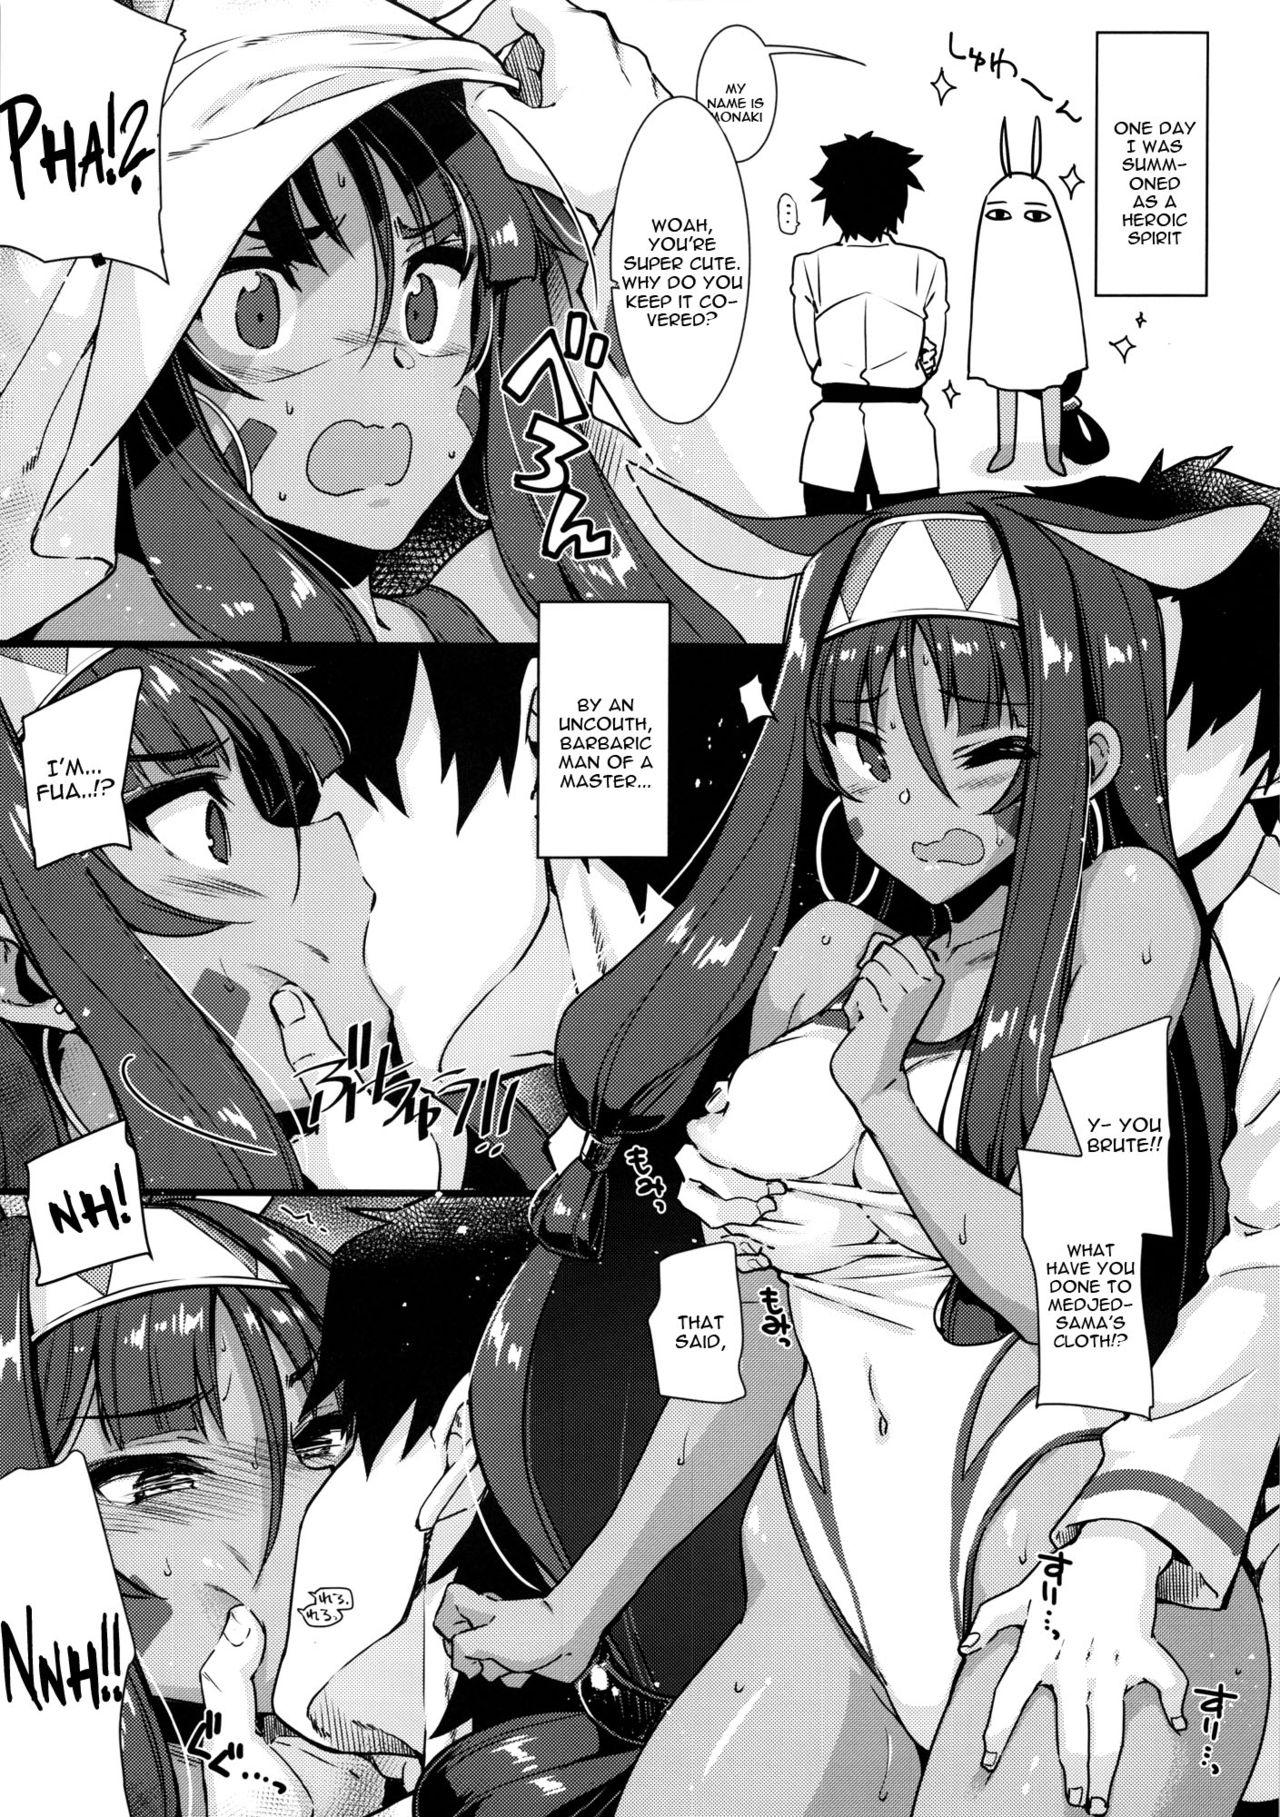 Ngentot Non Stop FU.KE.I | Non Stop Blas.phe.my - Fate grand order Girl Gets Fucked - Page 2